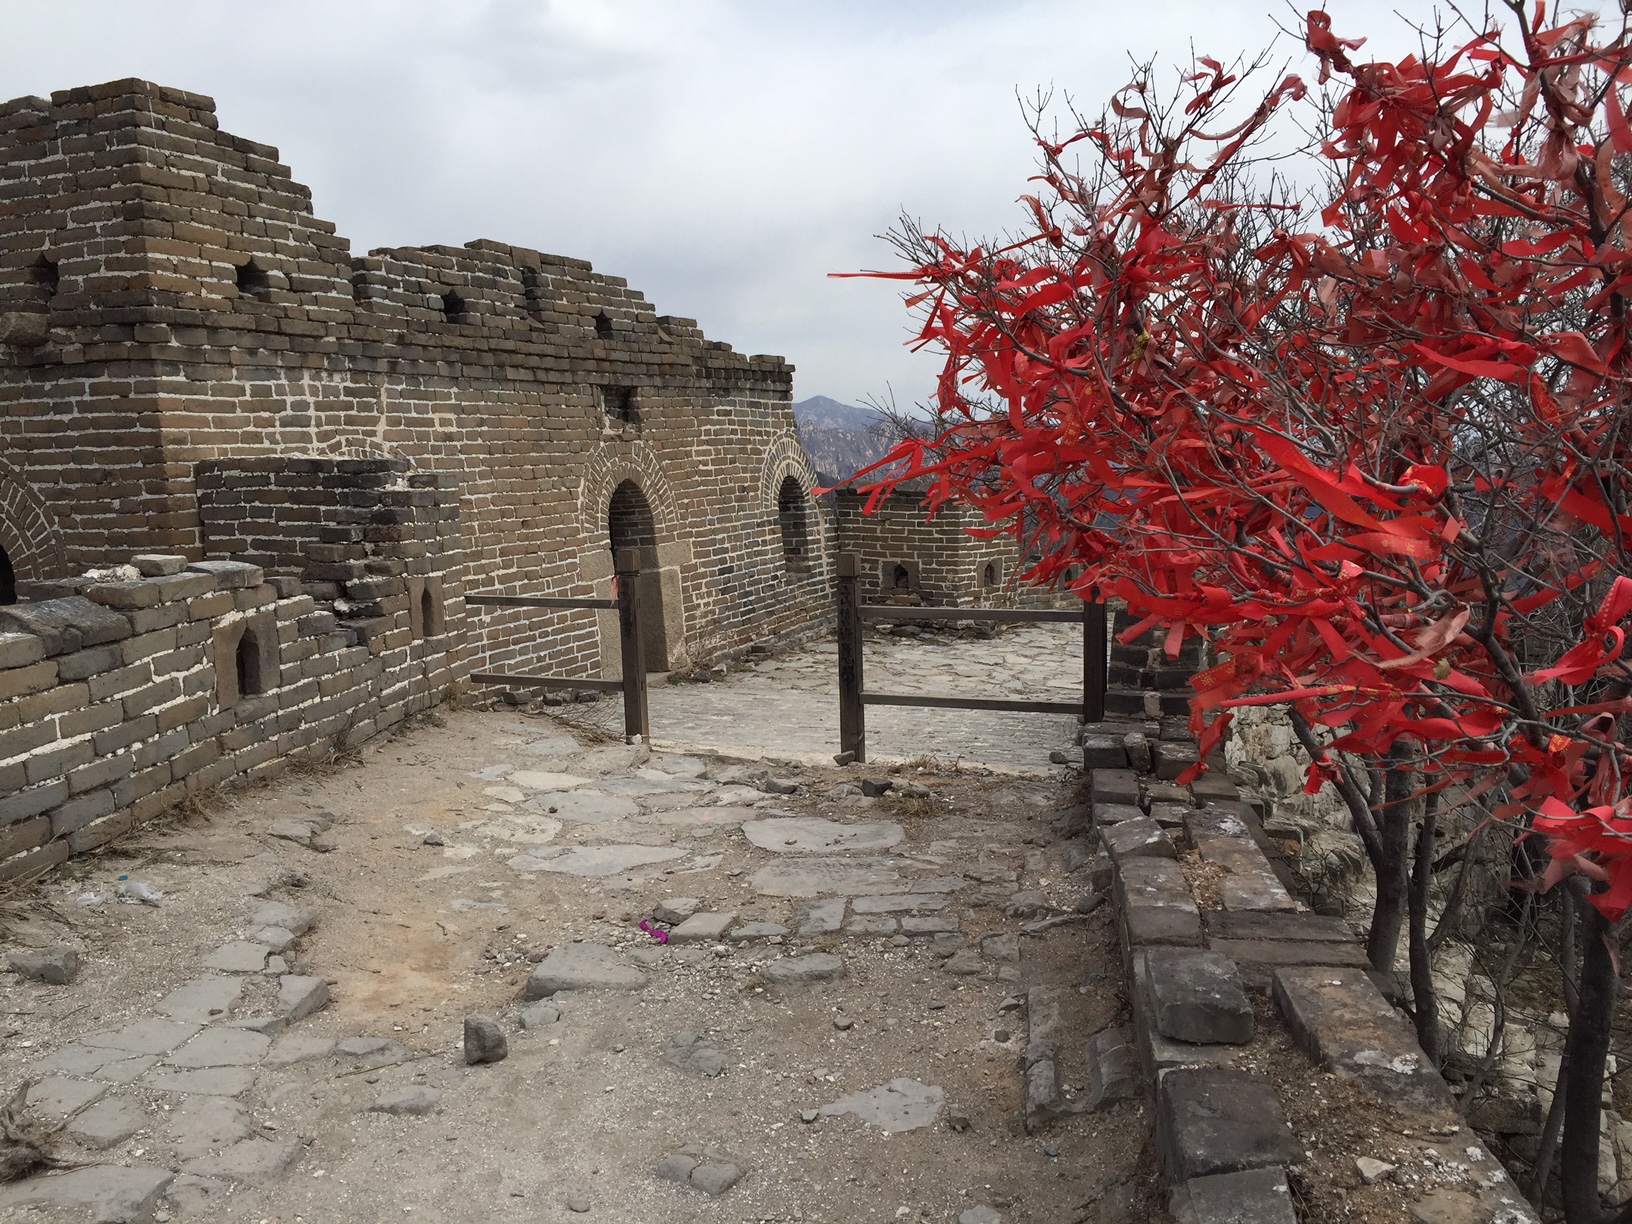 Great Wall, China - March 2016